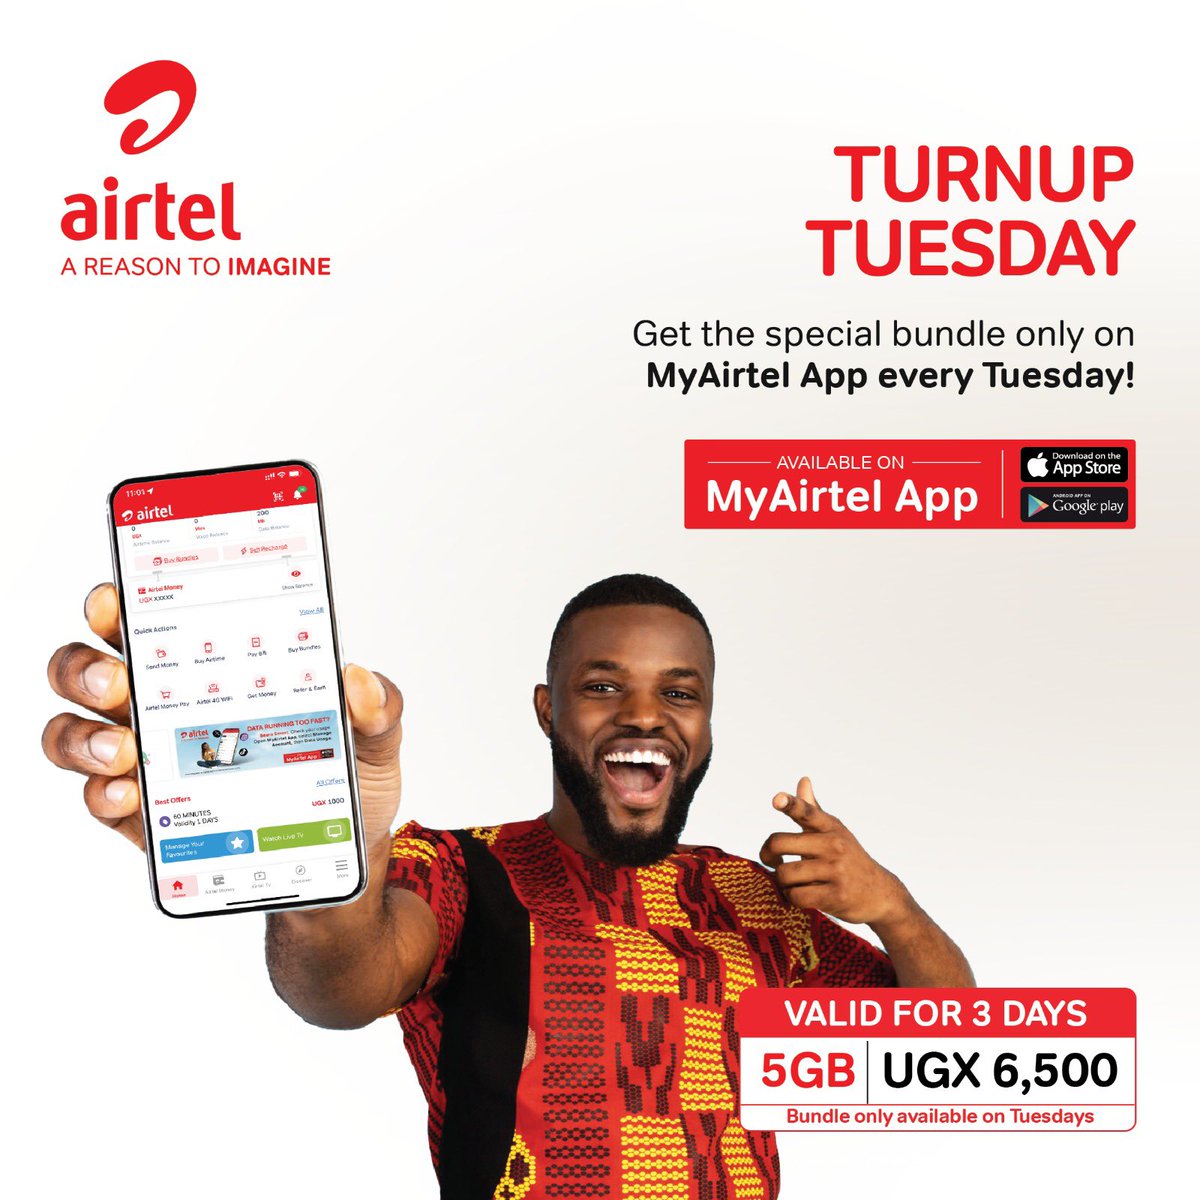 Tuesday is here, the #TurnUpTuesday package from #MyAirtelApp is available 
Get it and enjoy